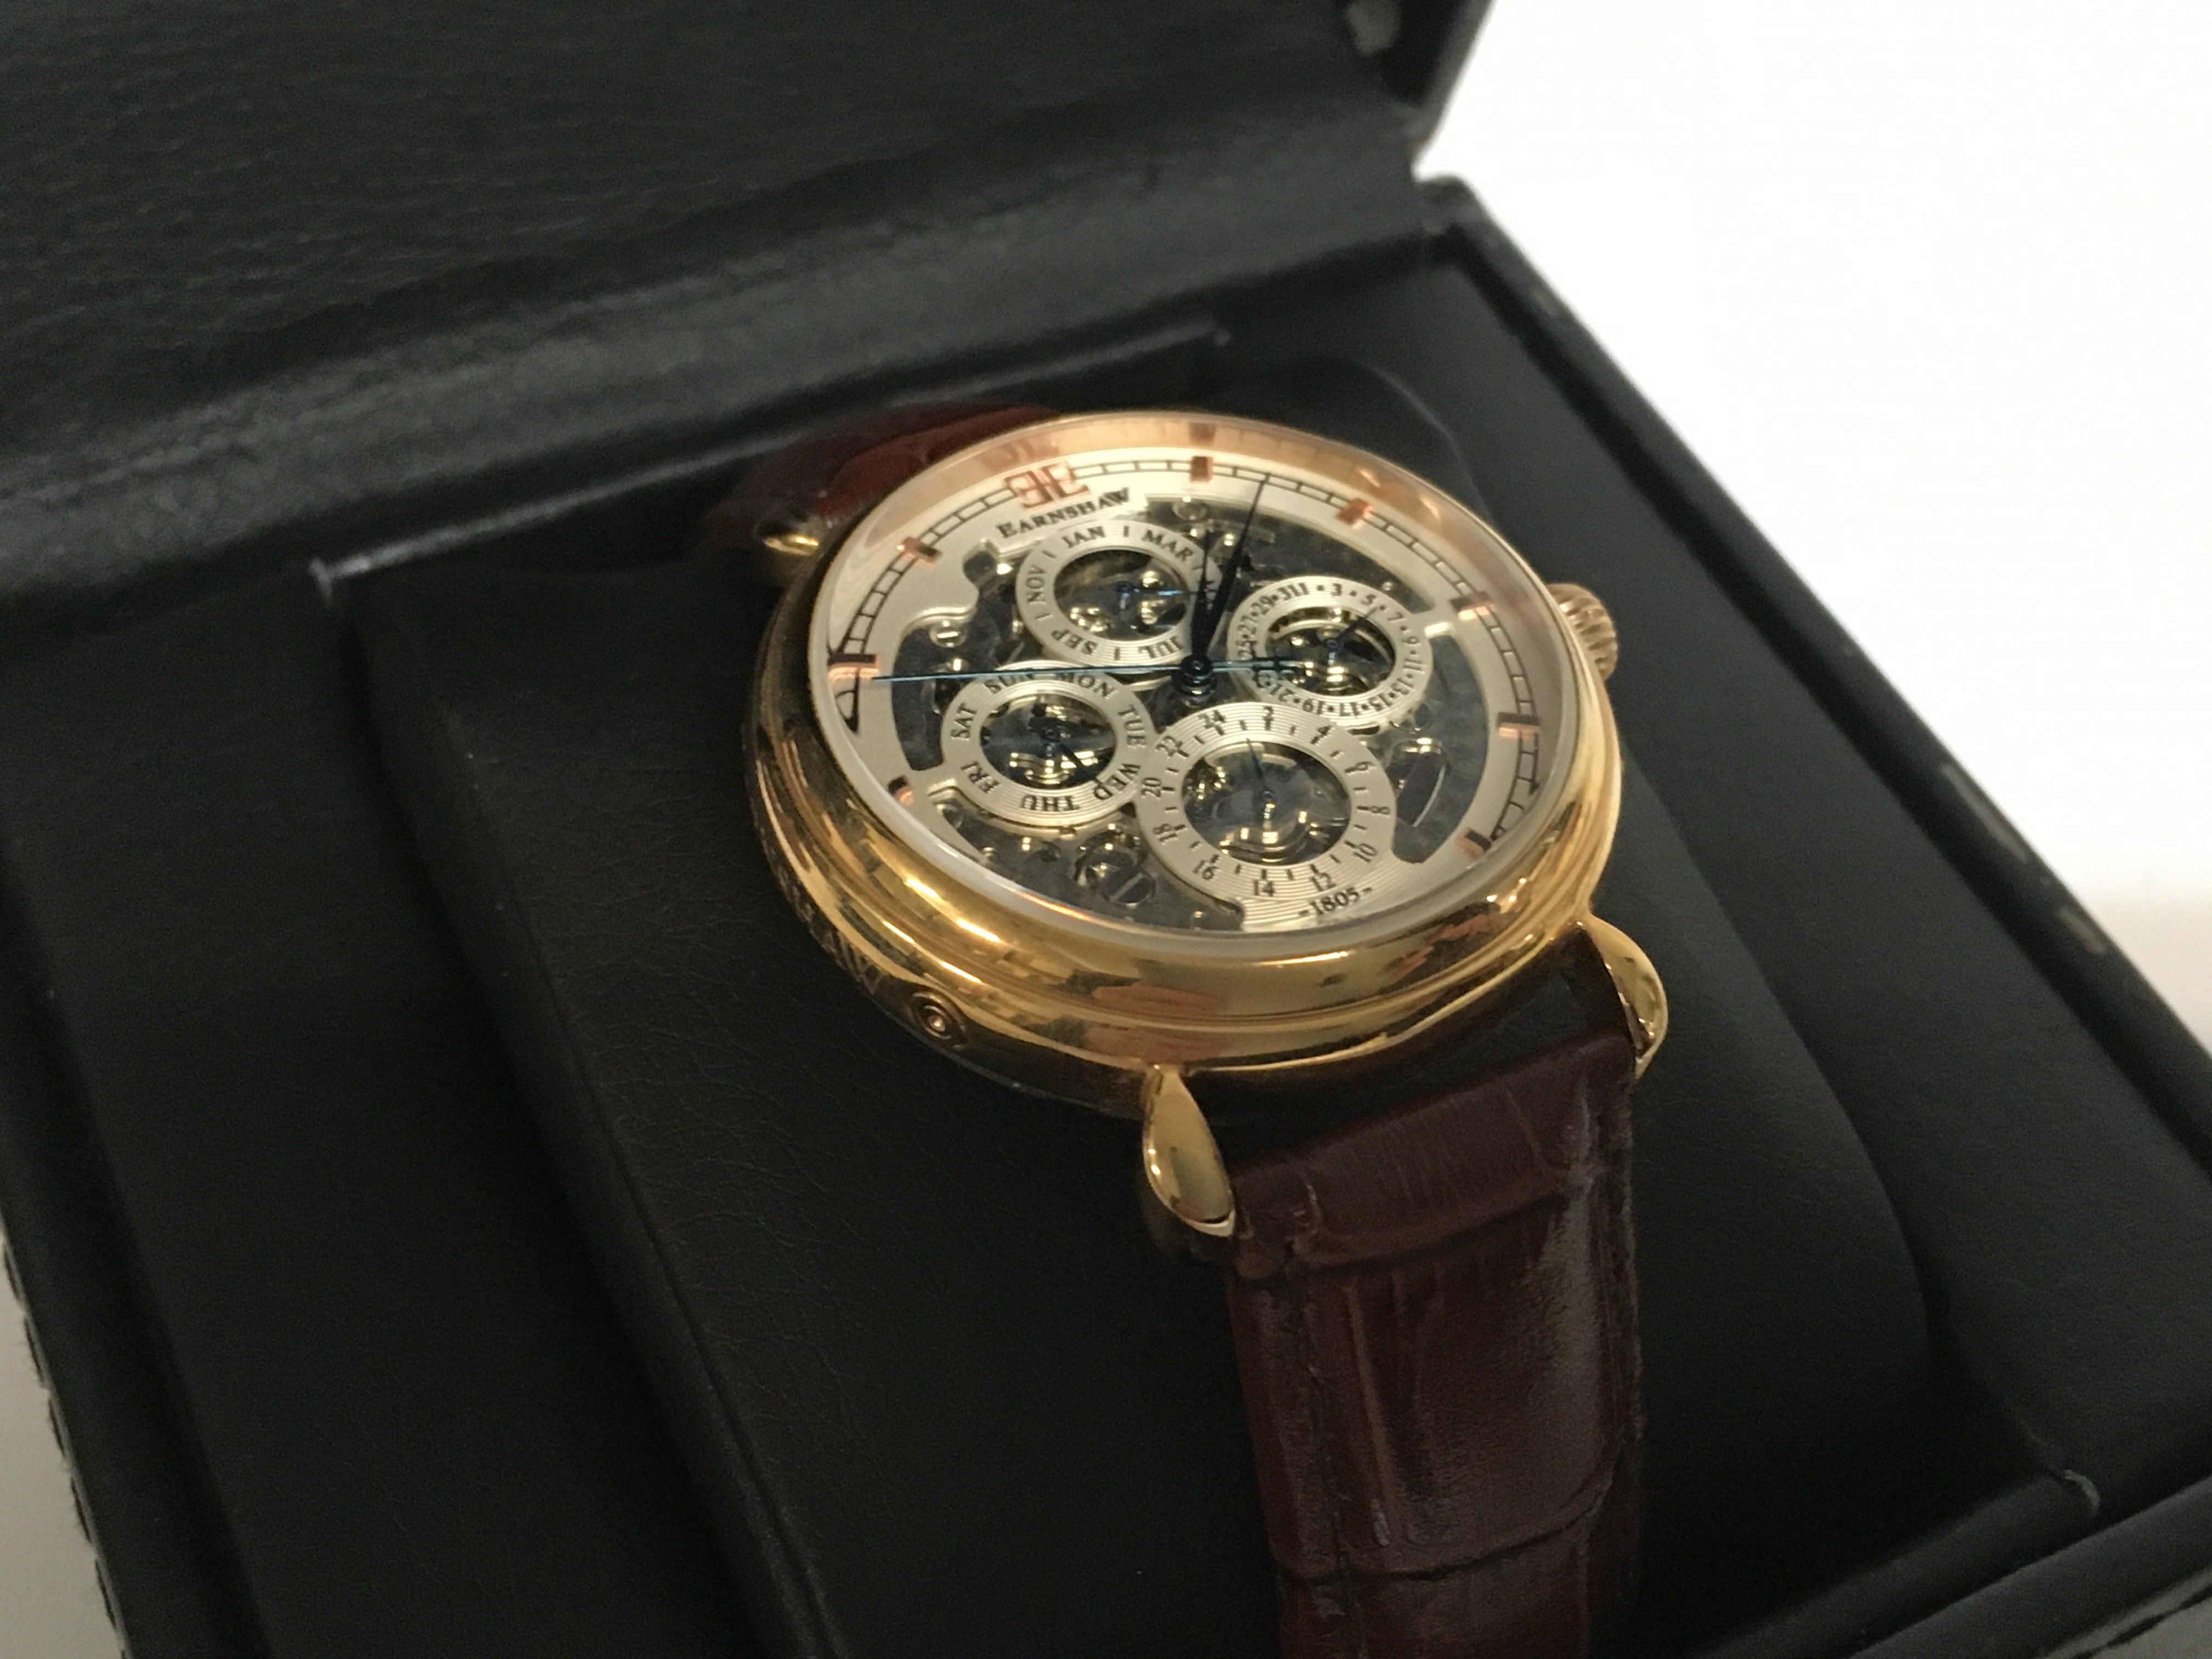 A boxed Earnshaw watch with skeleton movement. Pos